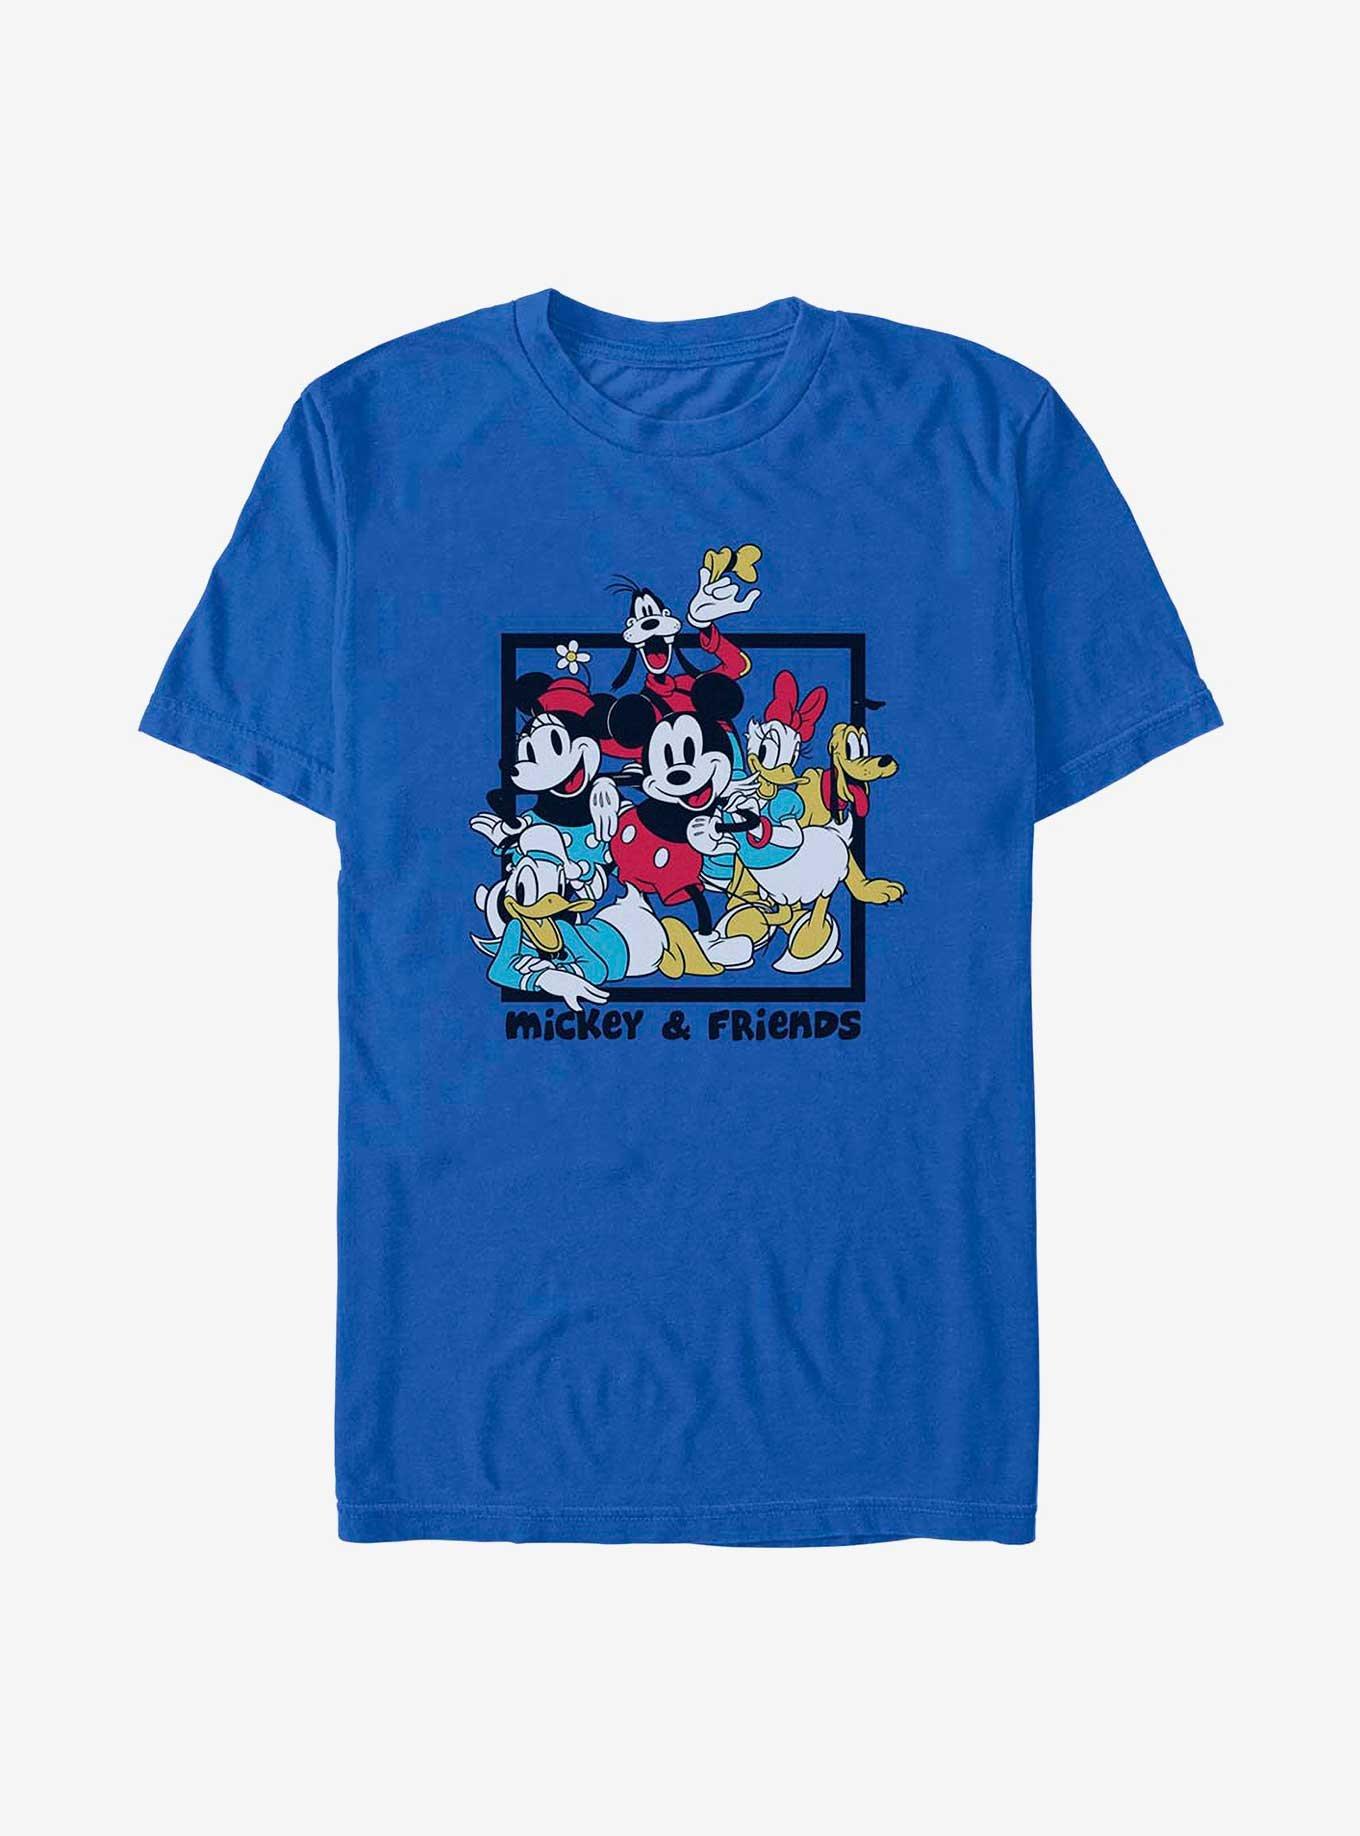 Disney Mickey Mouse & Friends Square T-Shirt